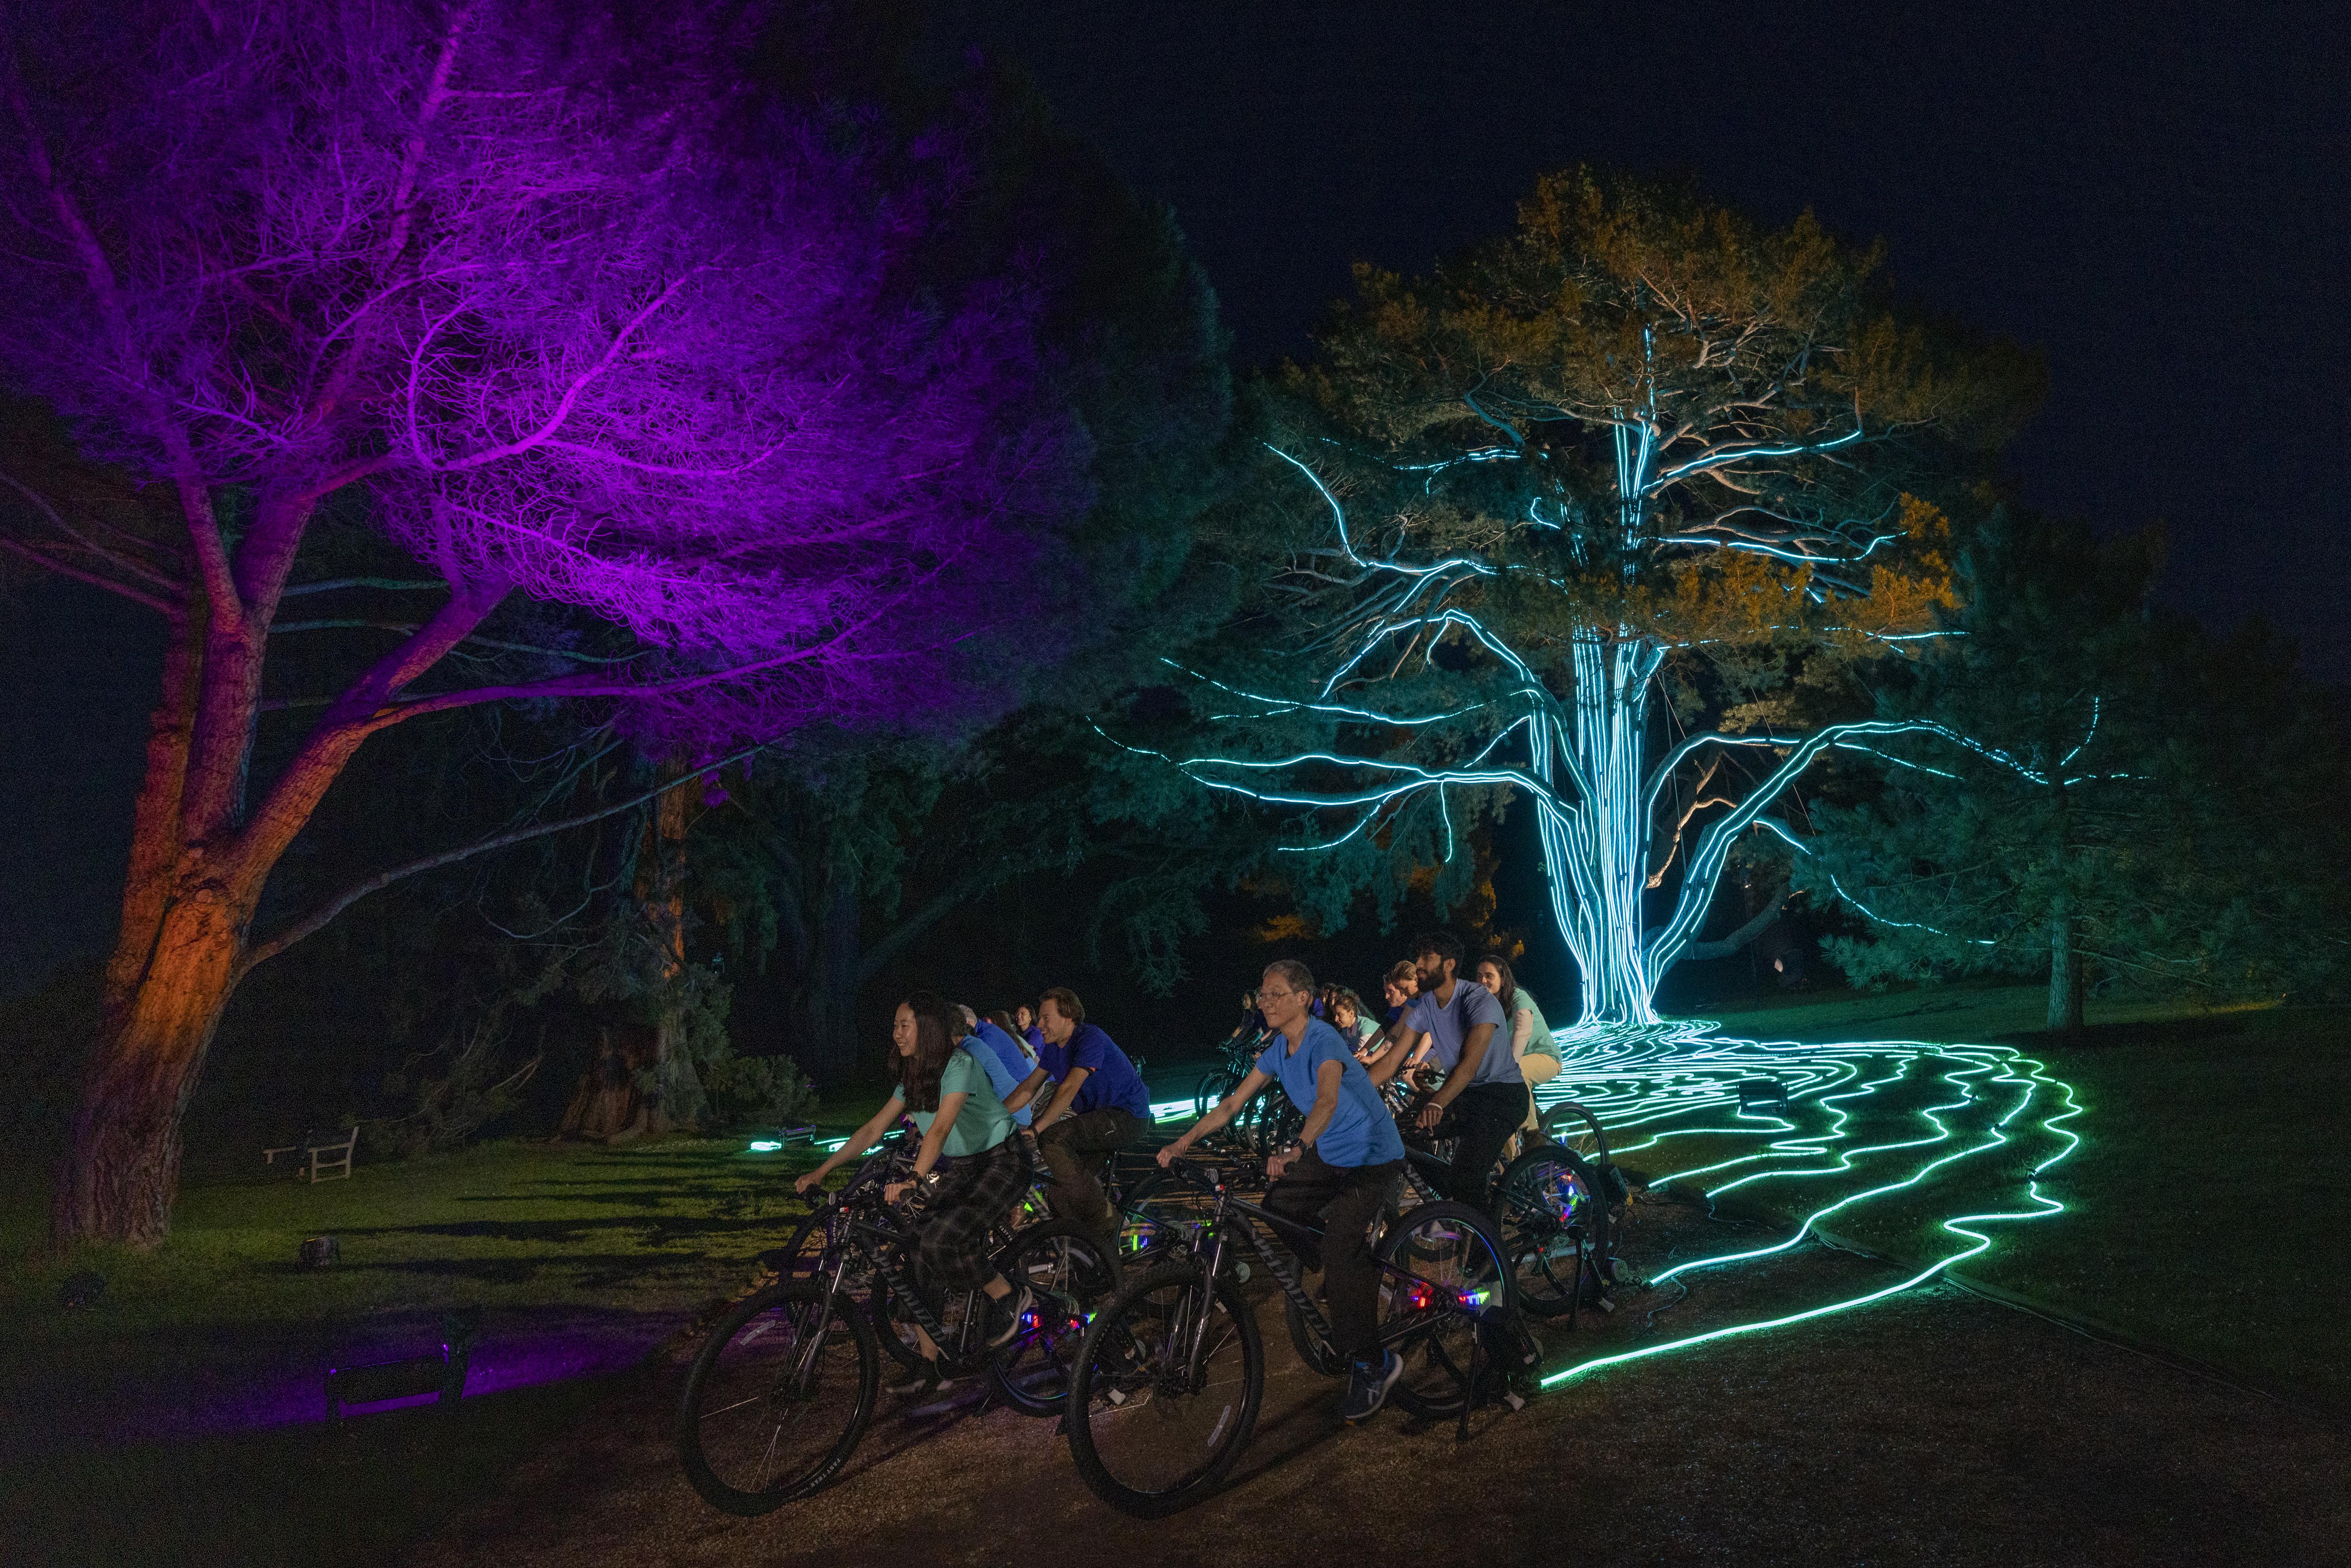 Students and staff on stationary cycles power lighting display on tree 